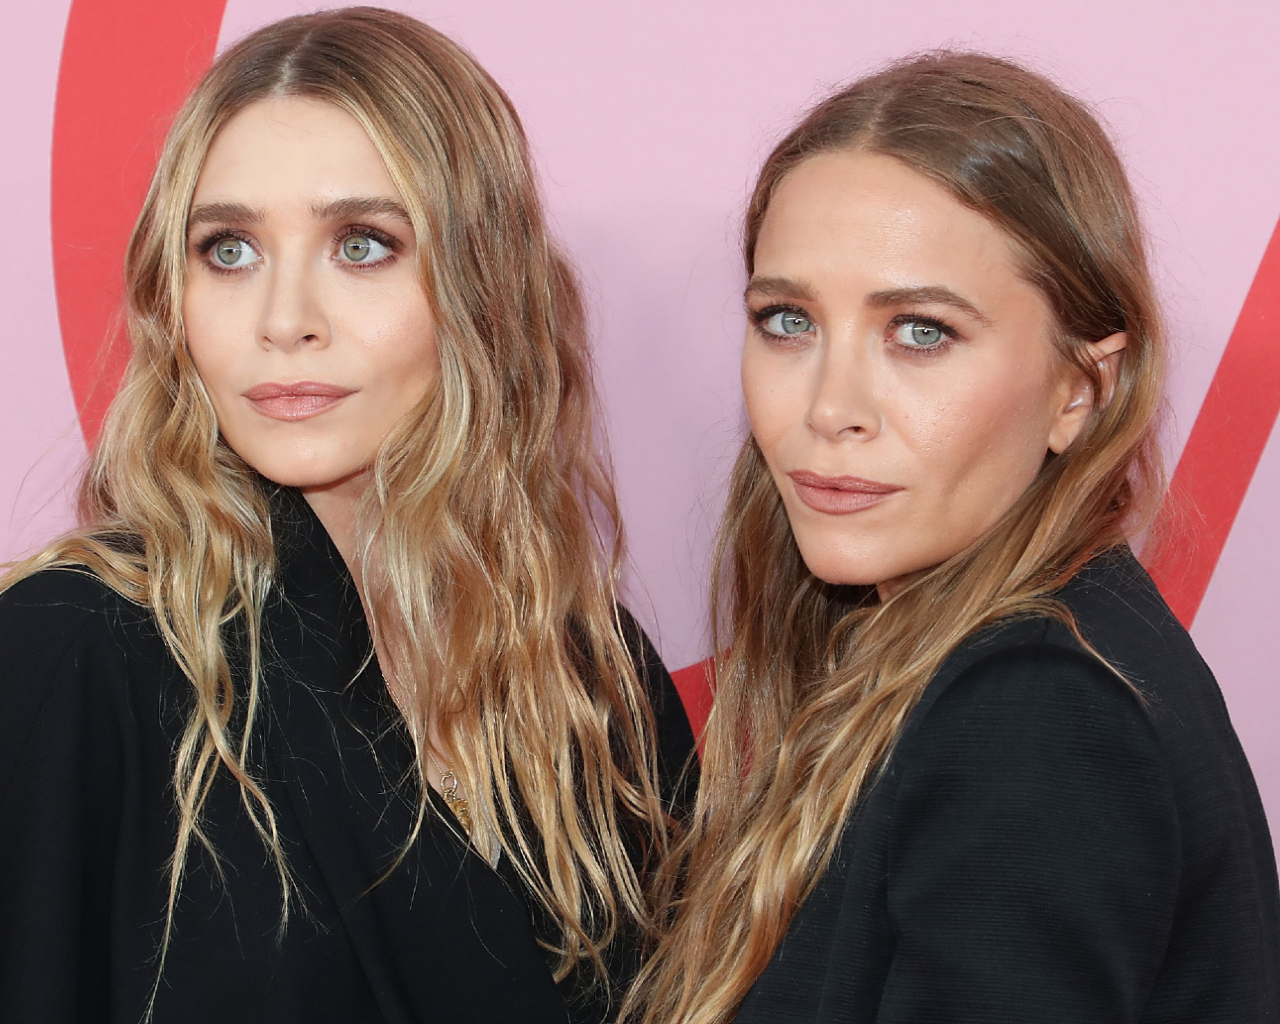 Mary-Kate and Ashley, Olsen sisters